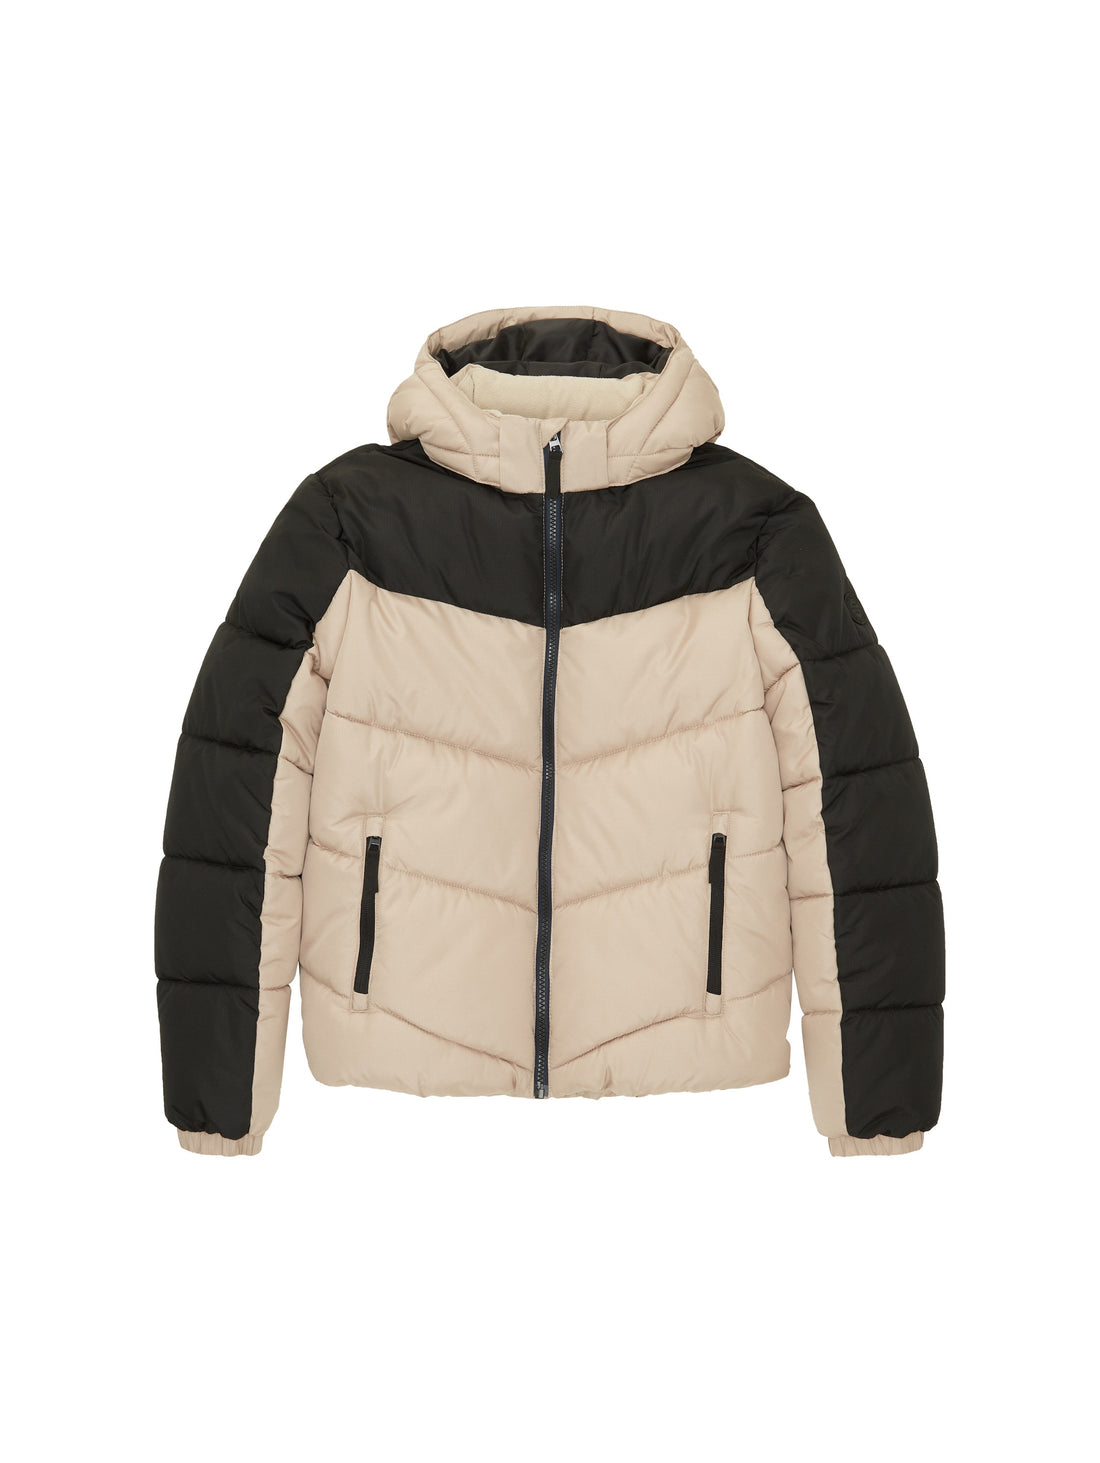 Heavy Puffer Jacket With Hood_1038540_12628_01